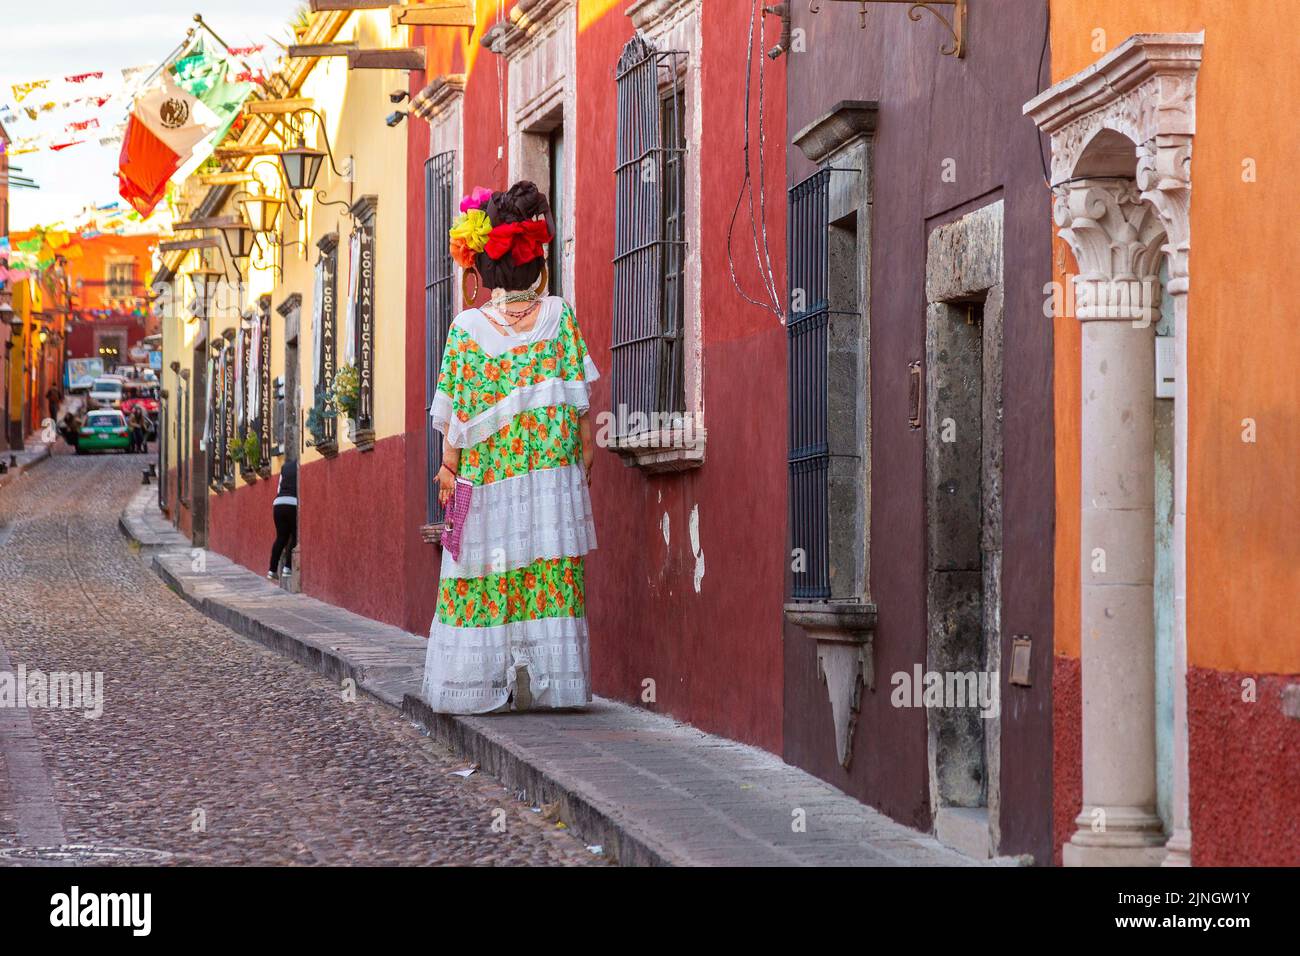 A mojiganga, or giant puppet made from papier mâché as it walks through the historic city center of San Miguel de Allende, Mexico. Stock Photo